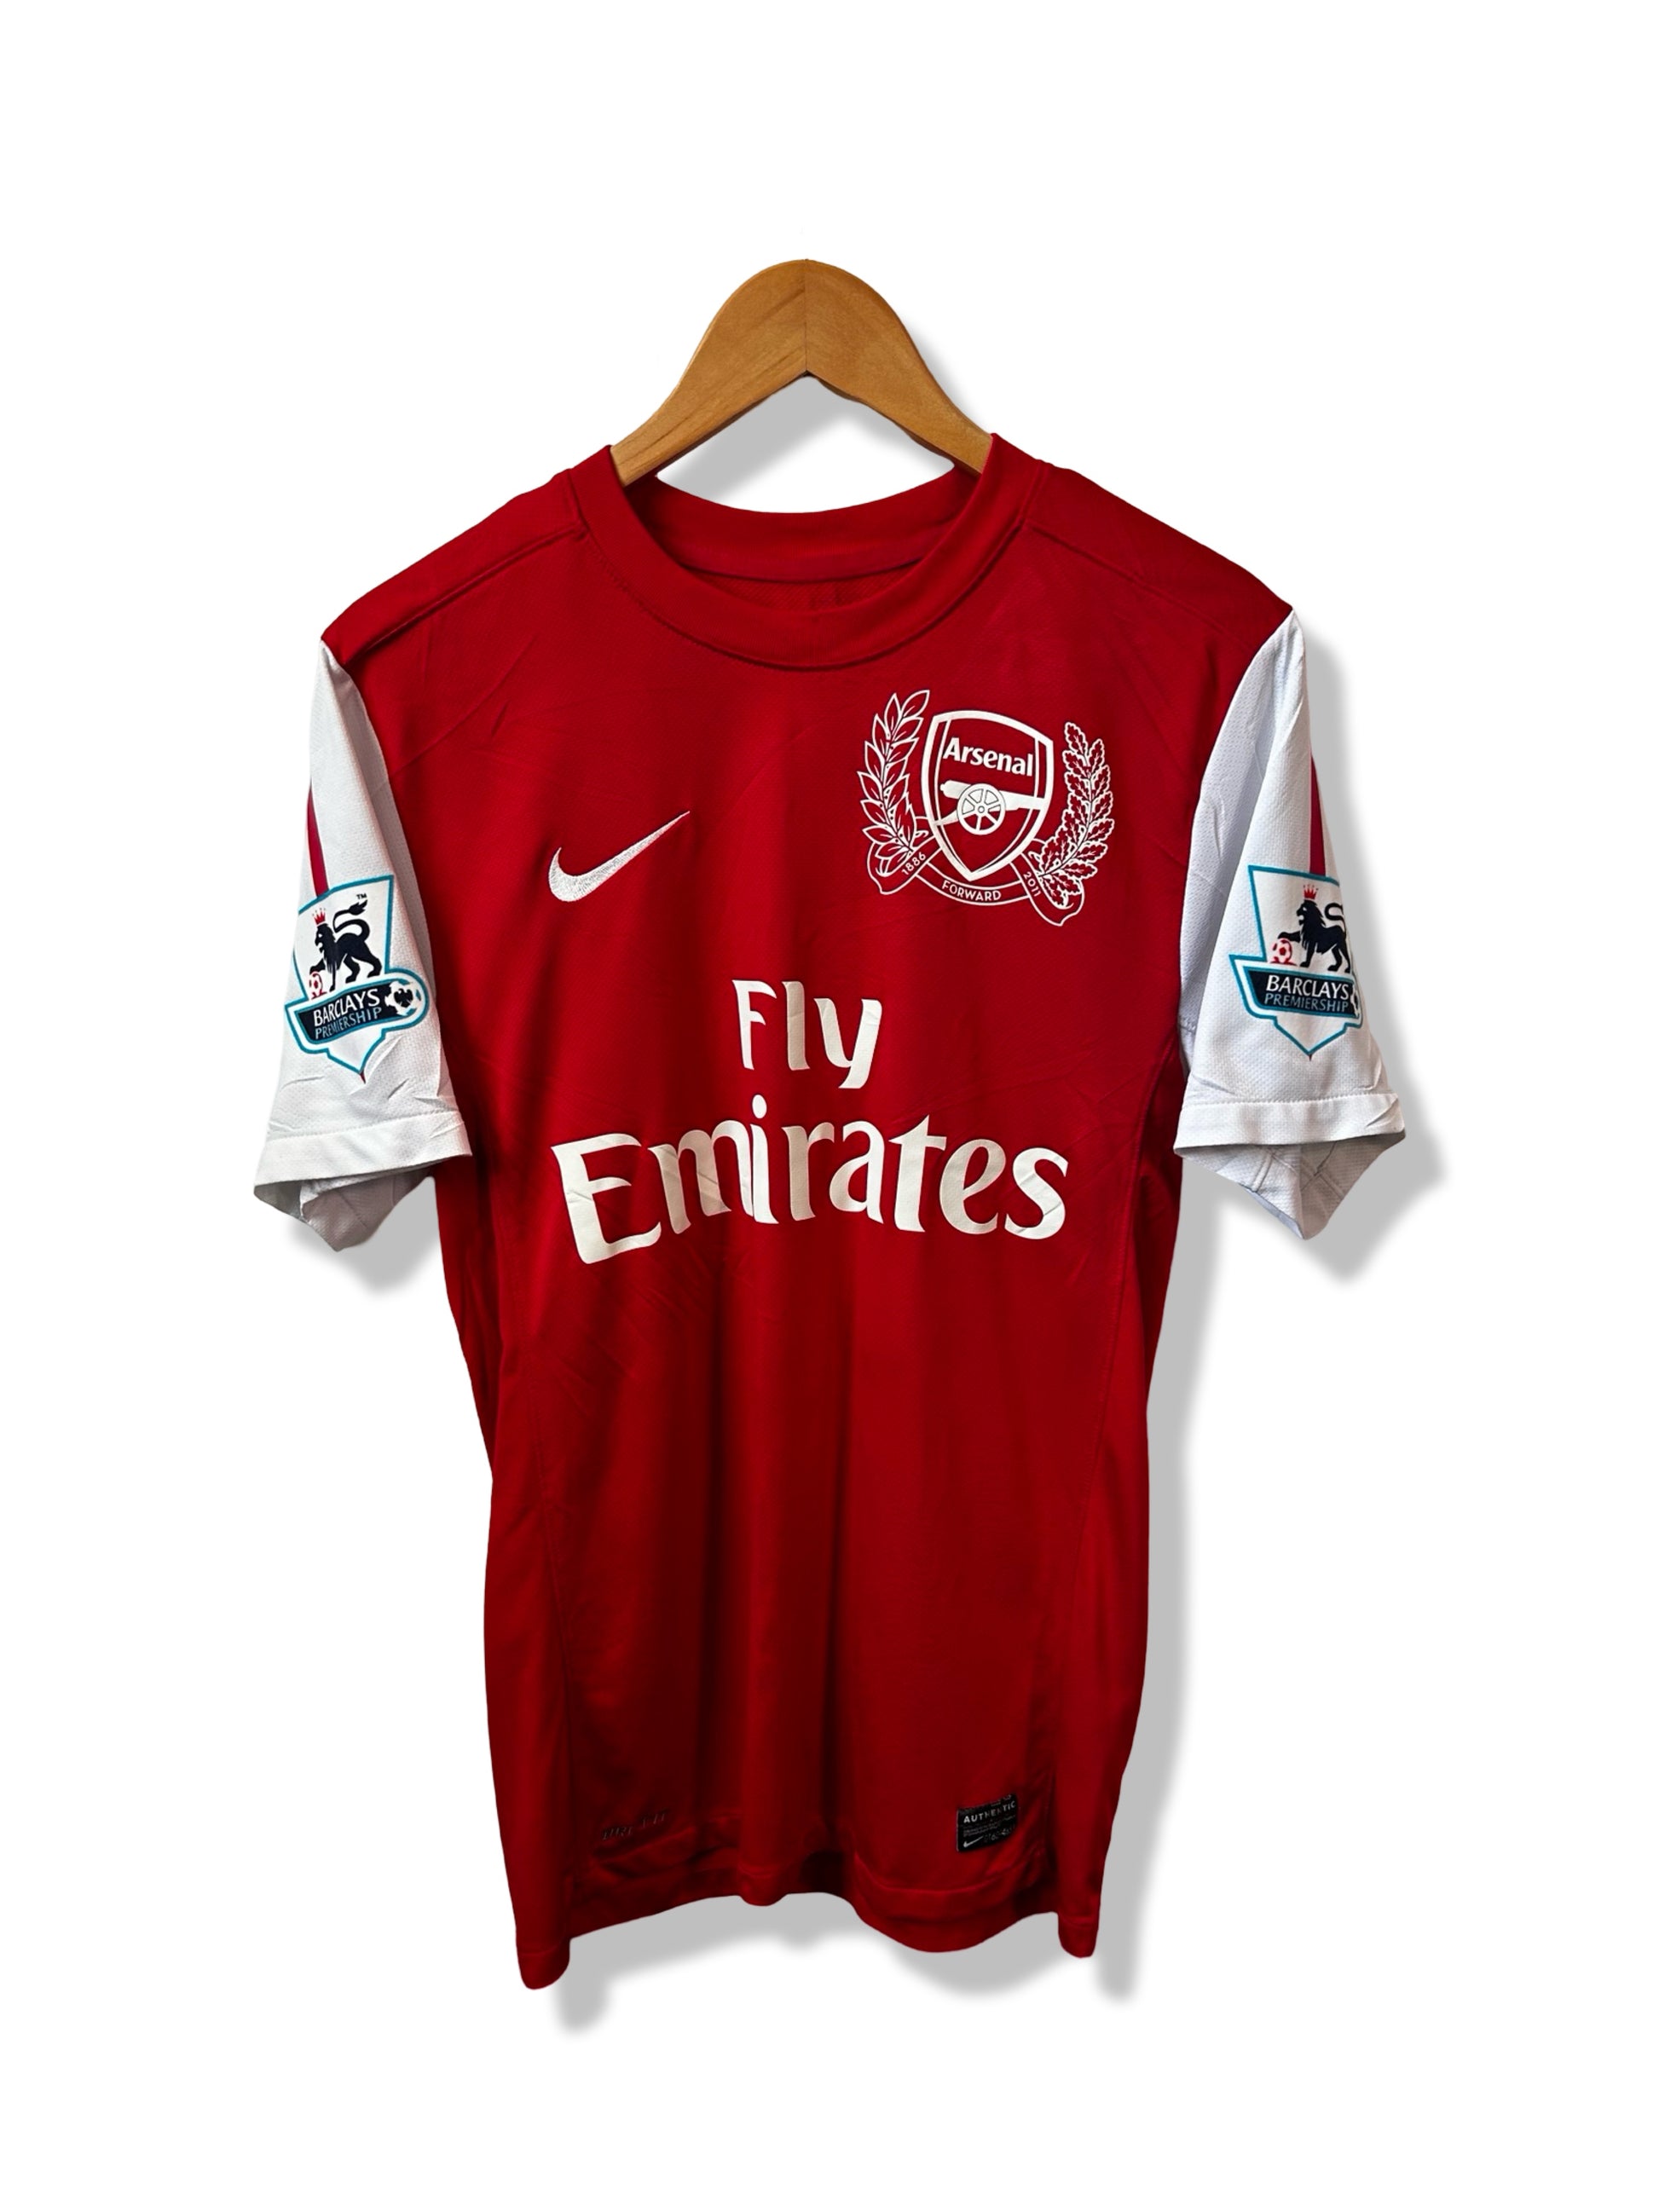 Arsenal 2011-12 Home Shirt, #12 Thierry Henry - M